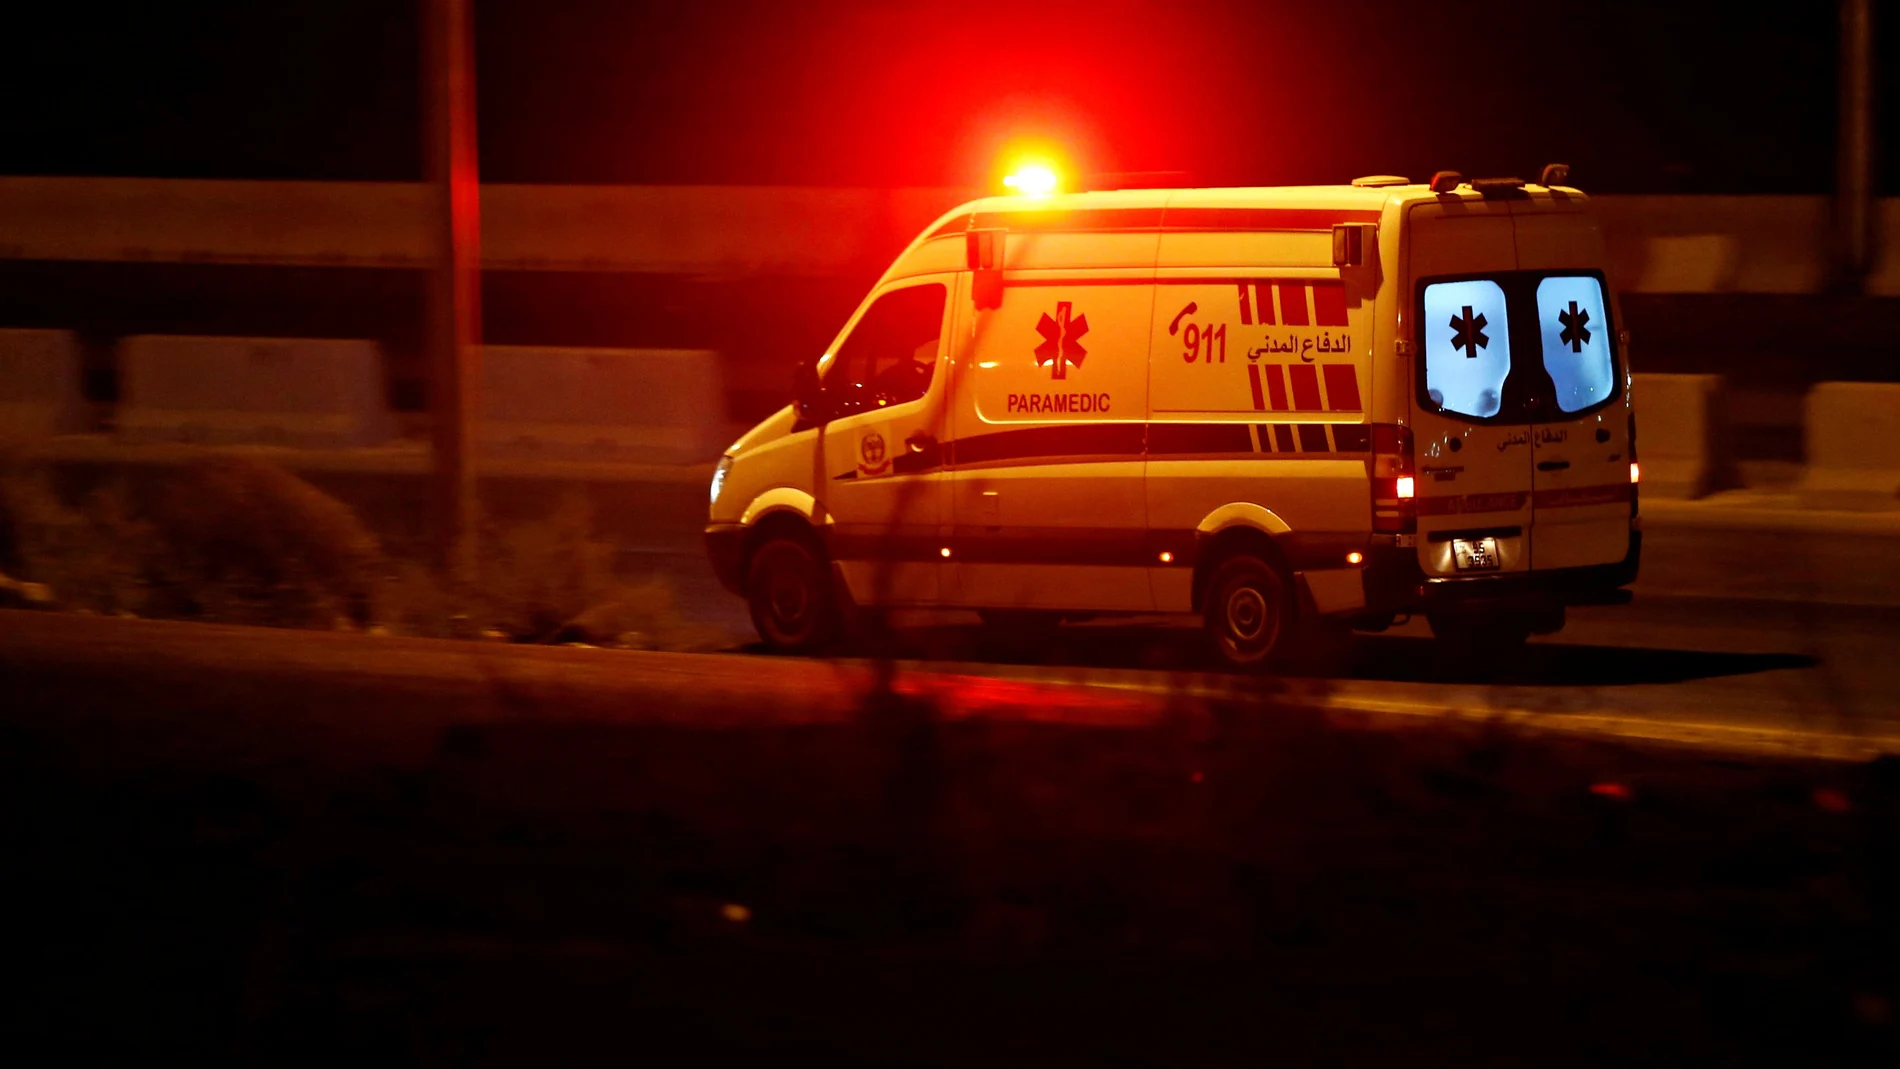 An ambulance heads towards the city of Zarqa on the highway between Amman and Zarqa